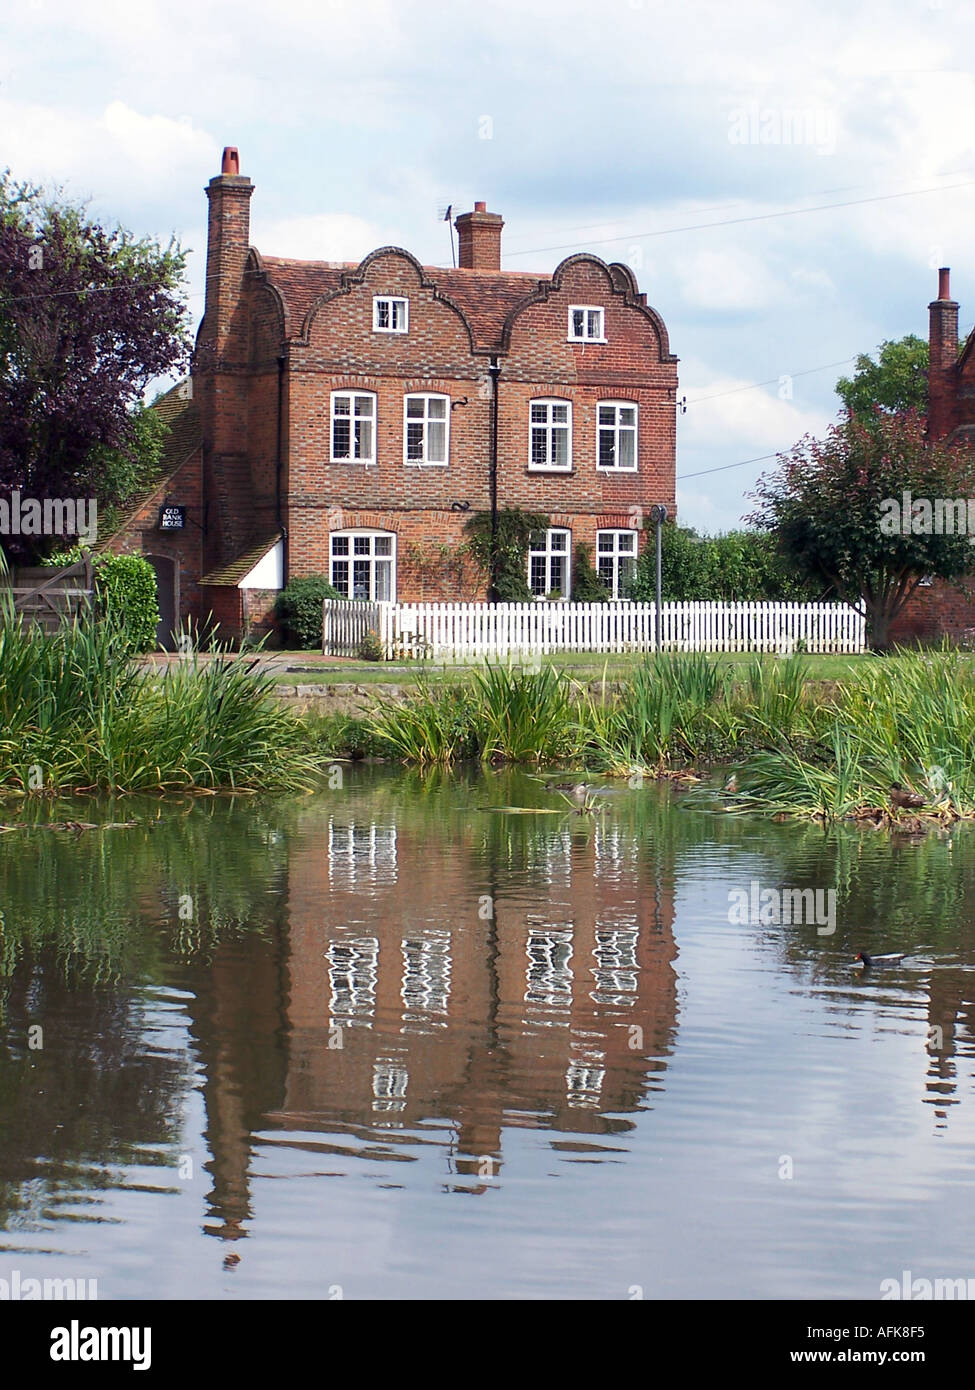 Old english house reflecting in a pond, Penn, Buckinghamshire